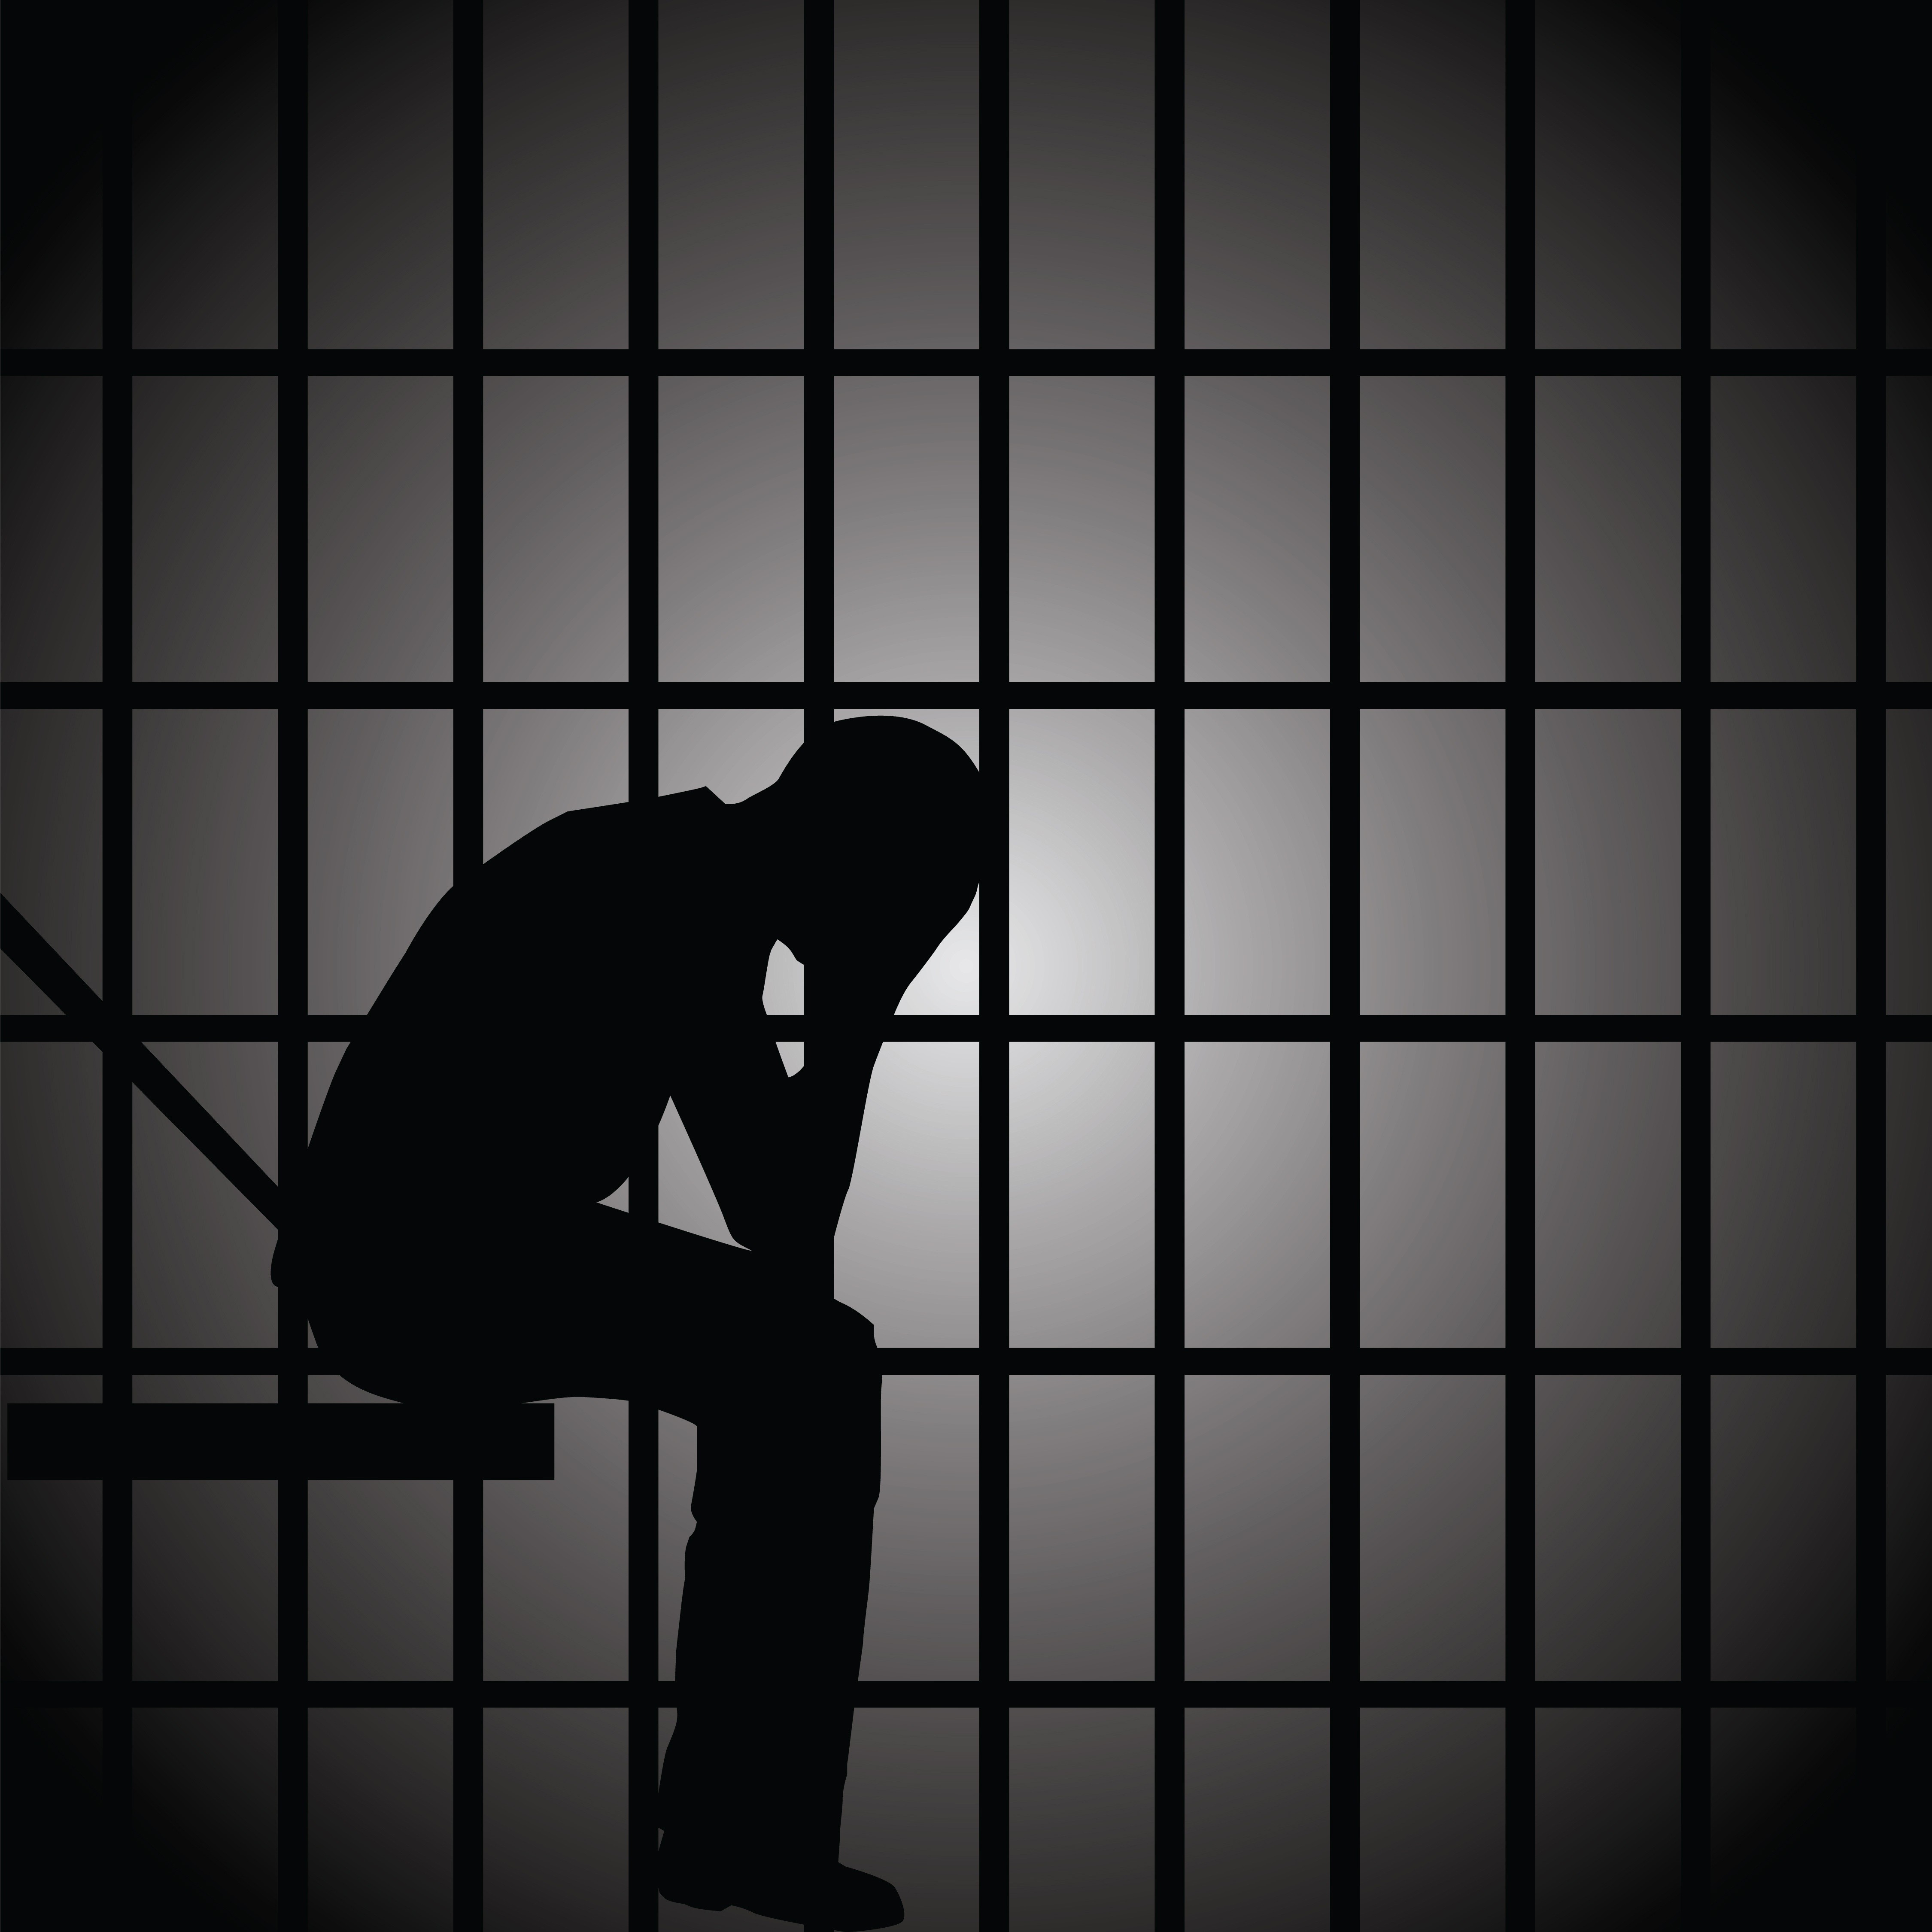 free clipart man in jail - photo #48